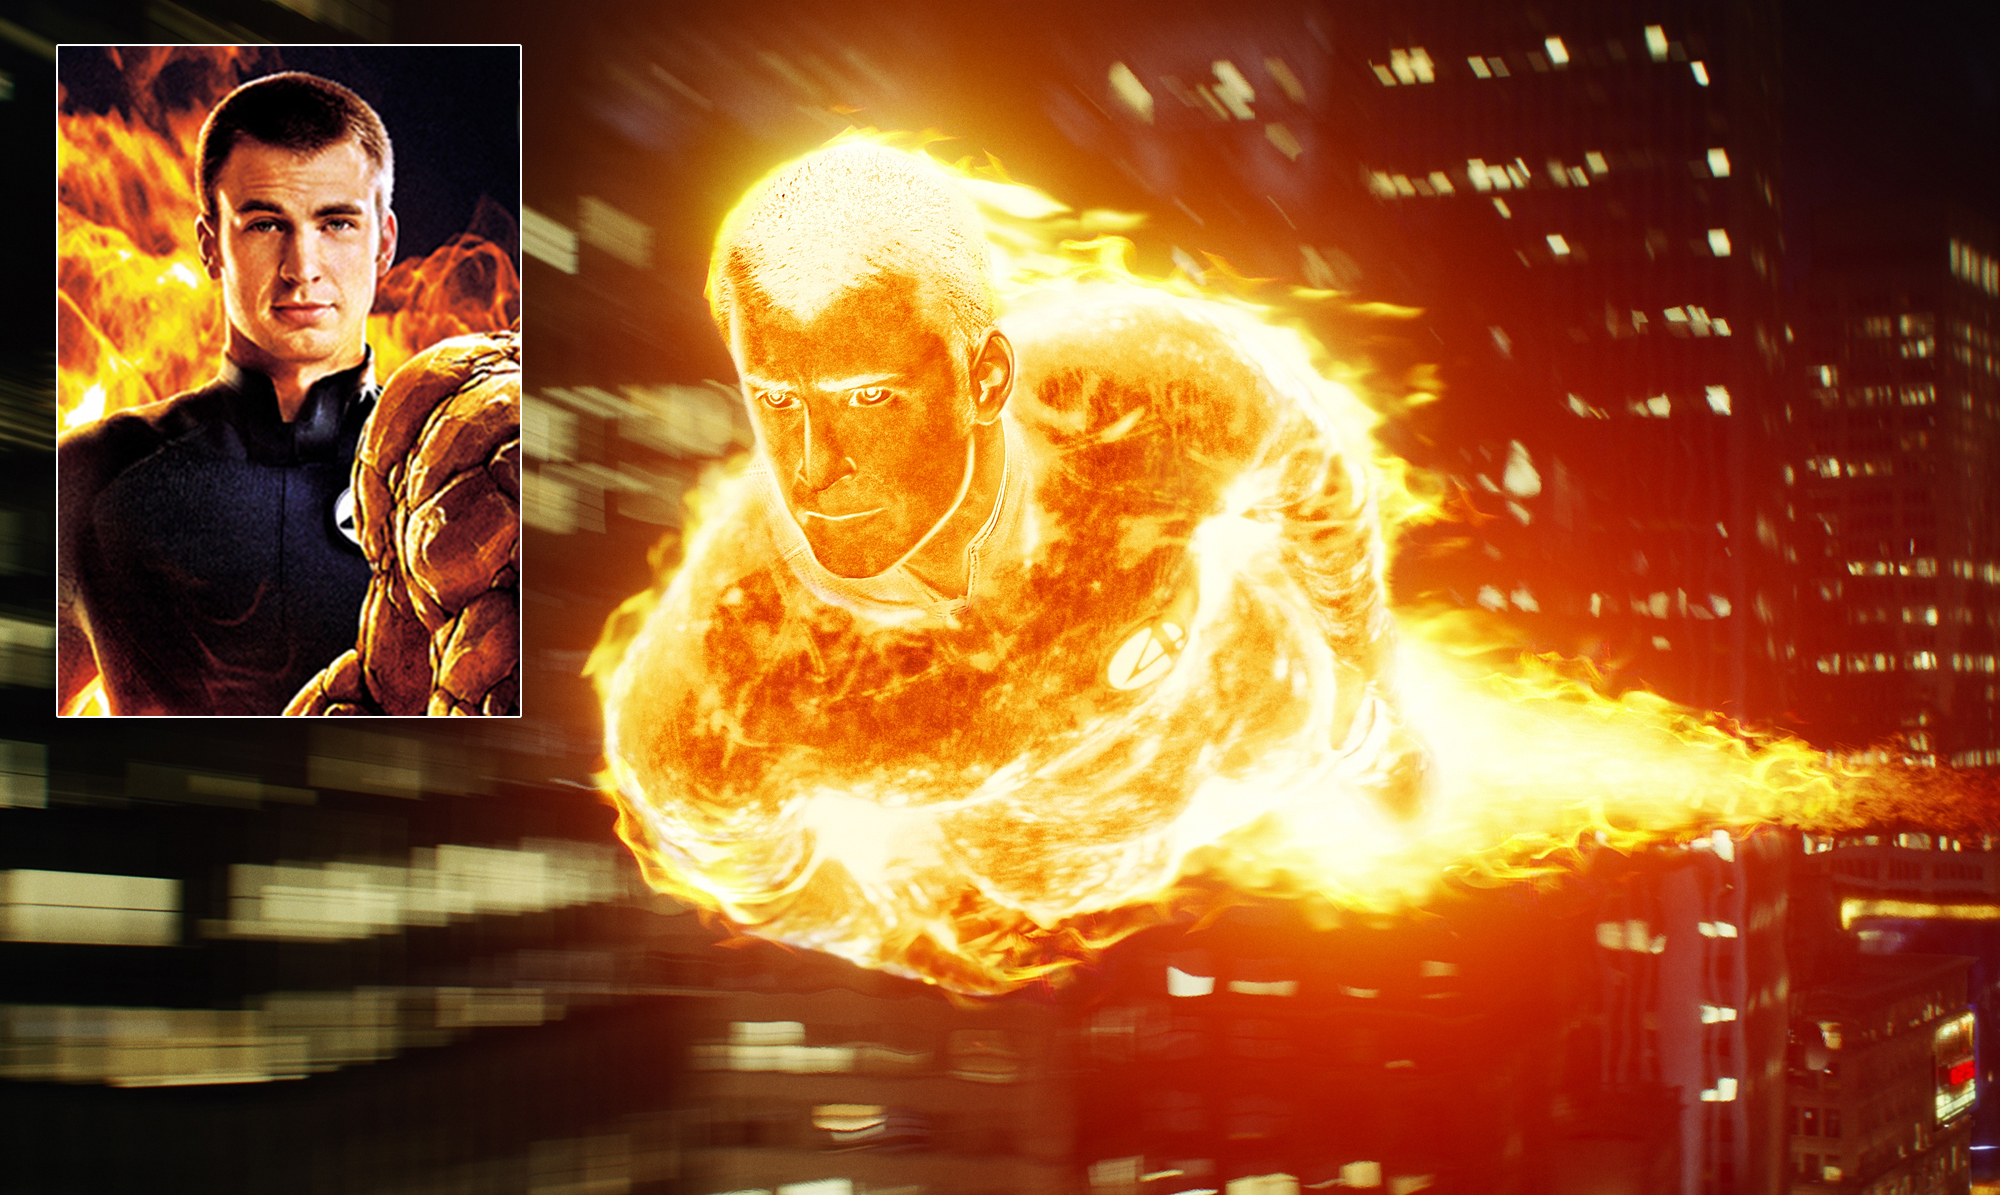 PHOTO: Chris Evans as The Human Torch in "The Fantastic Four."